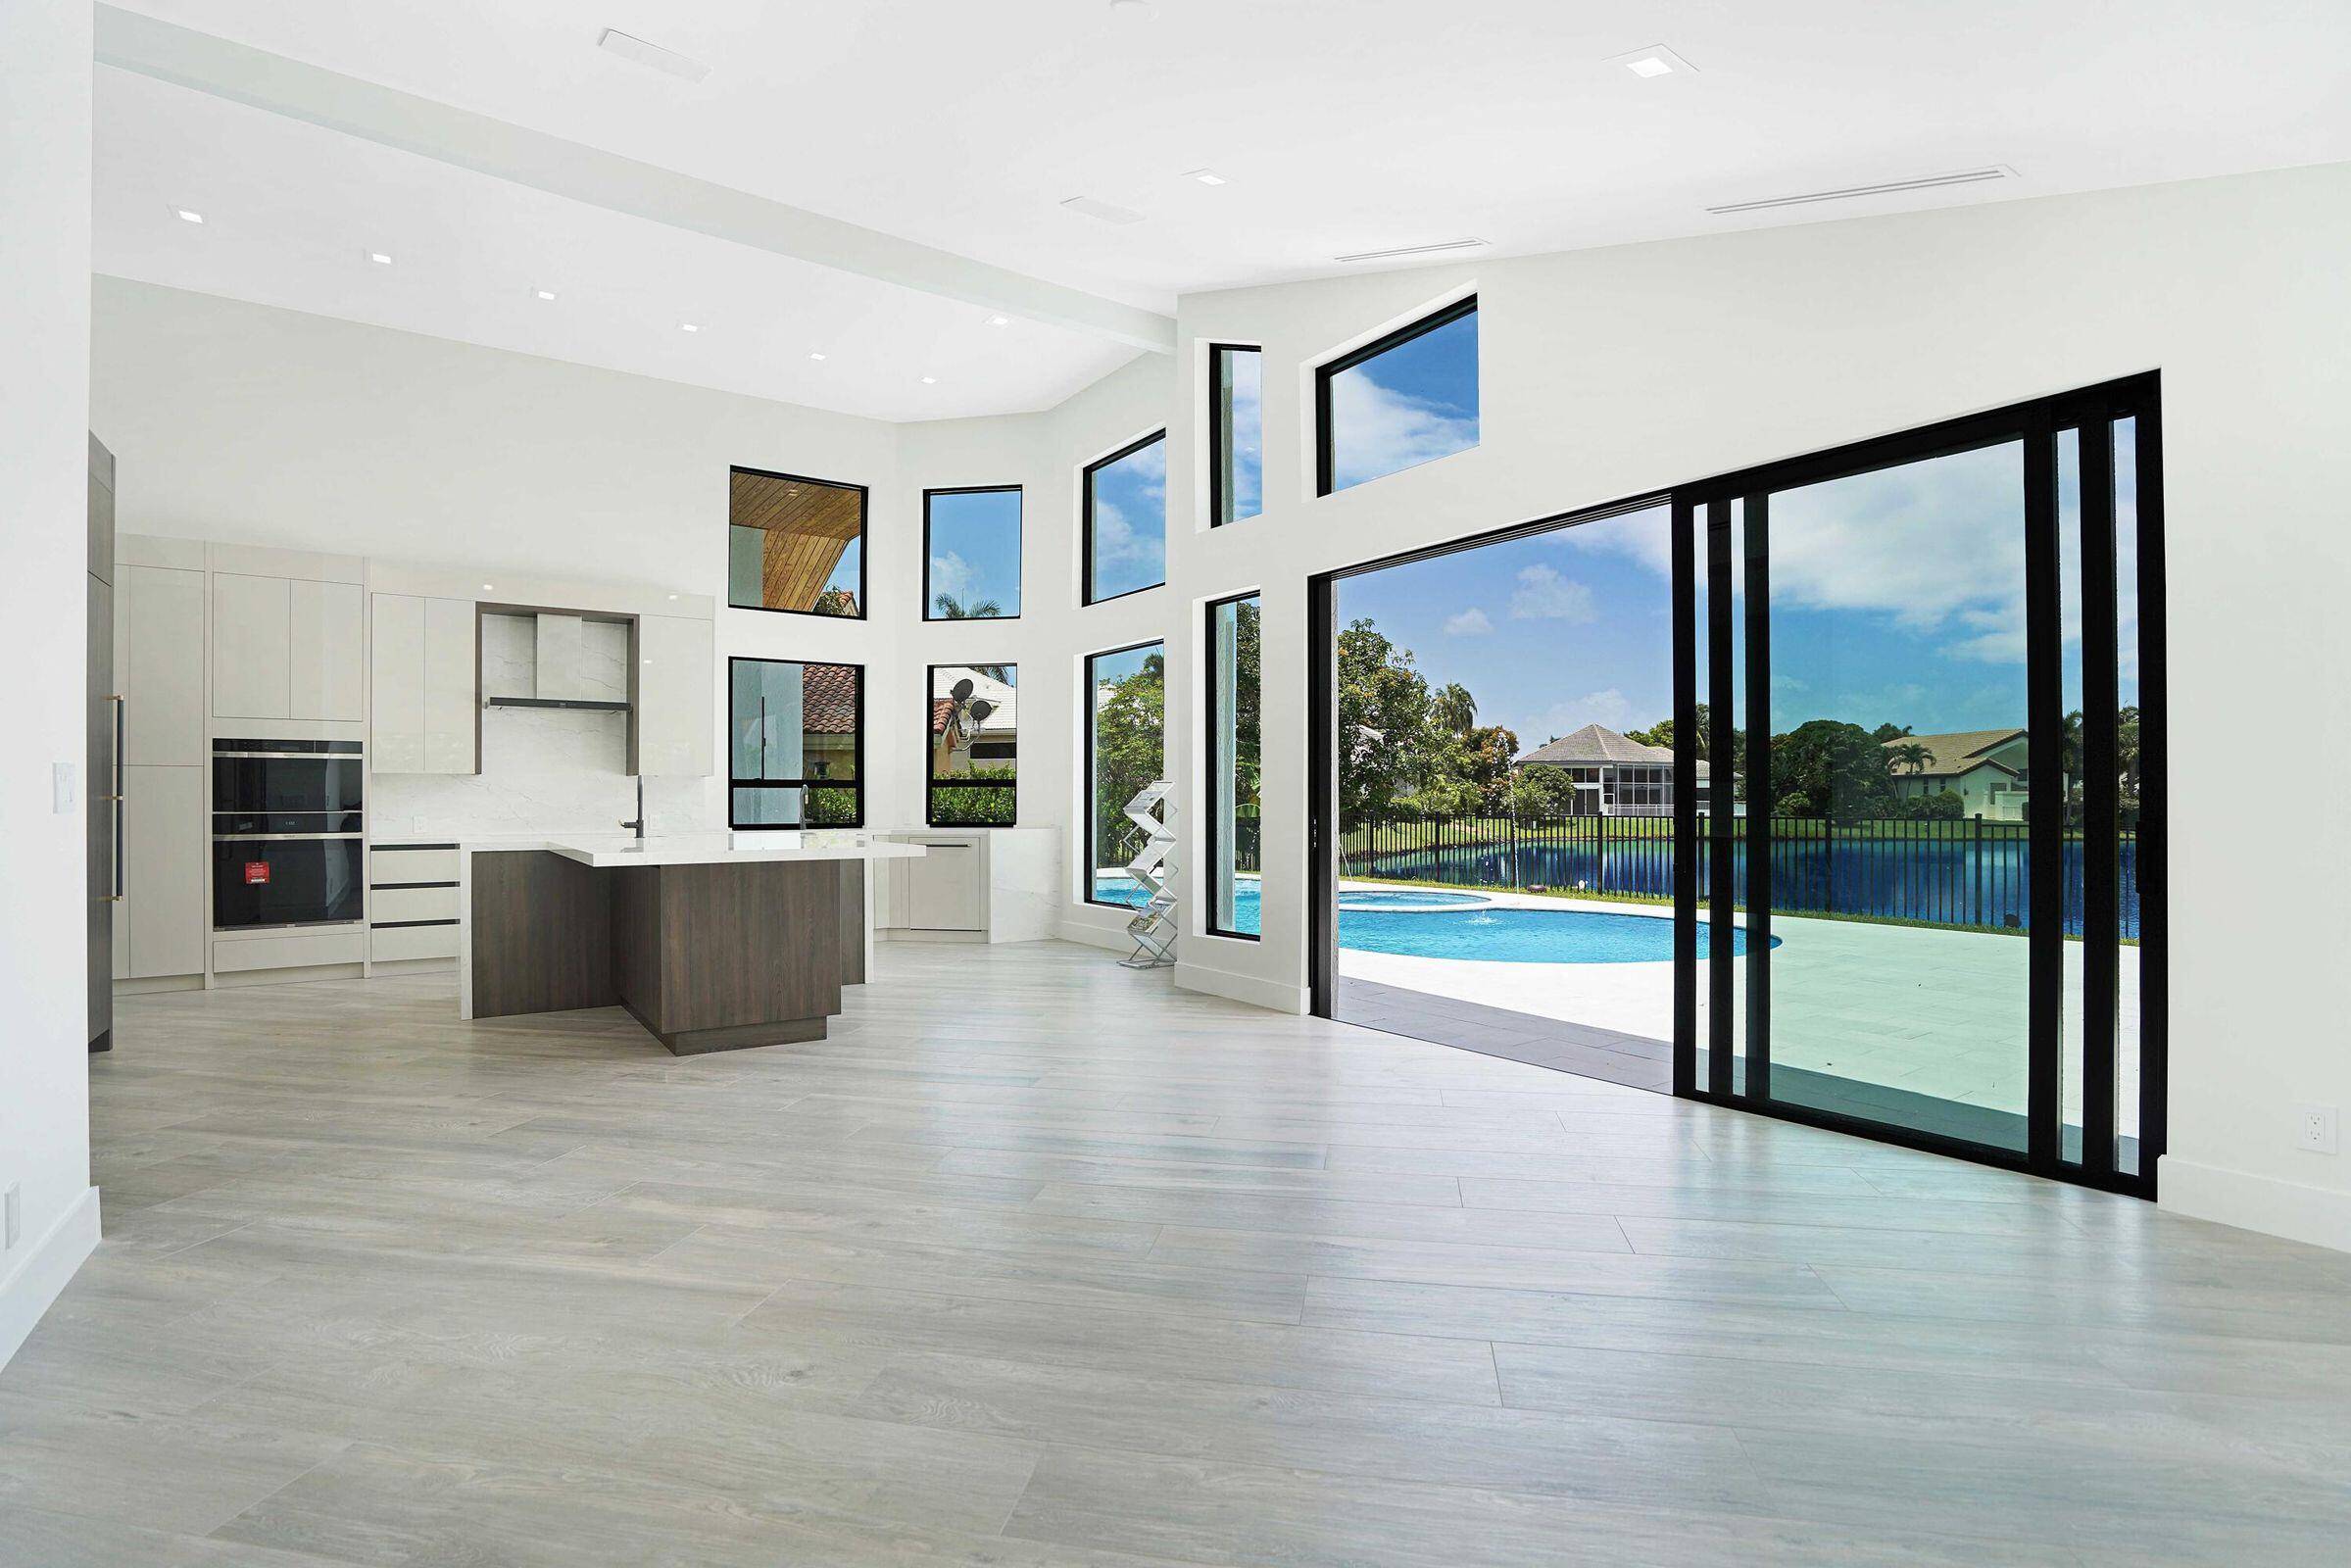 ntroducing 3025, a magnificent and modern home situated in one of the most coveted gated communities in Boca Raton.